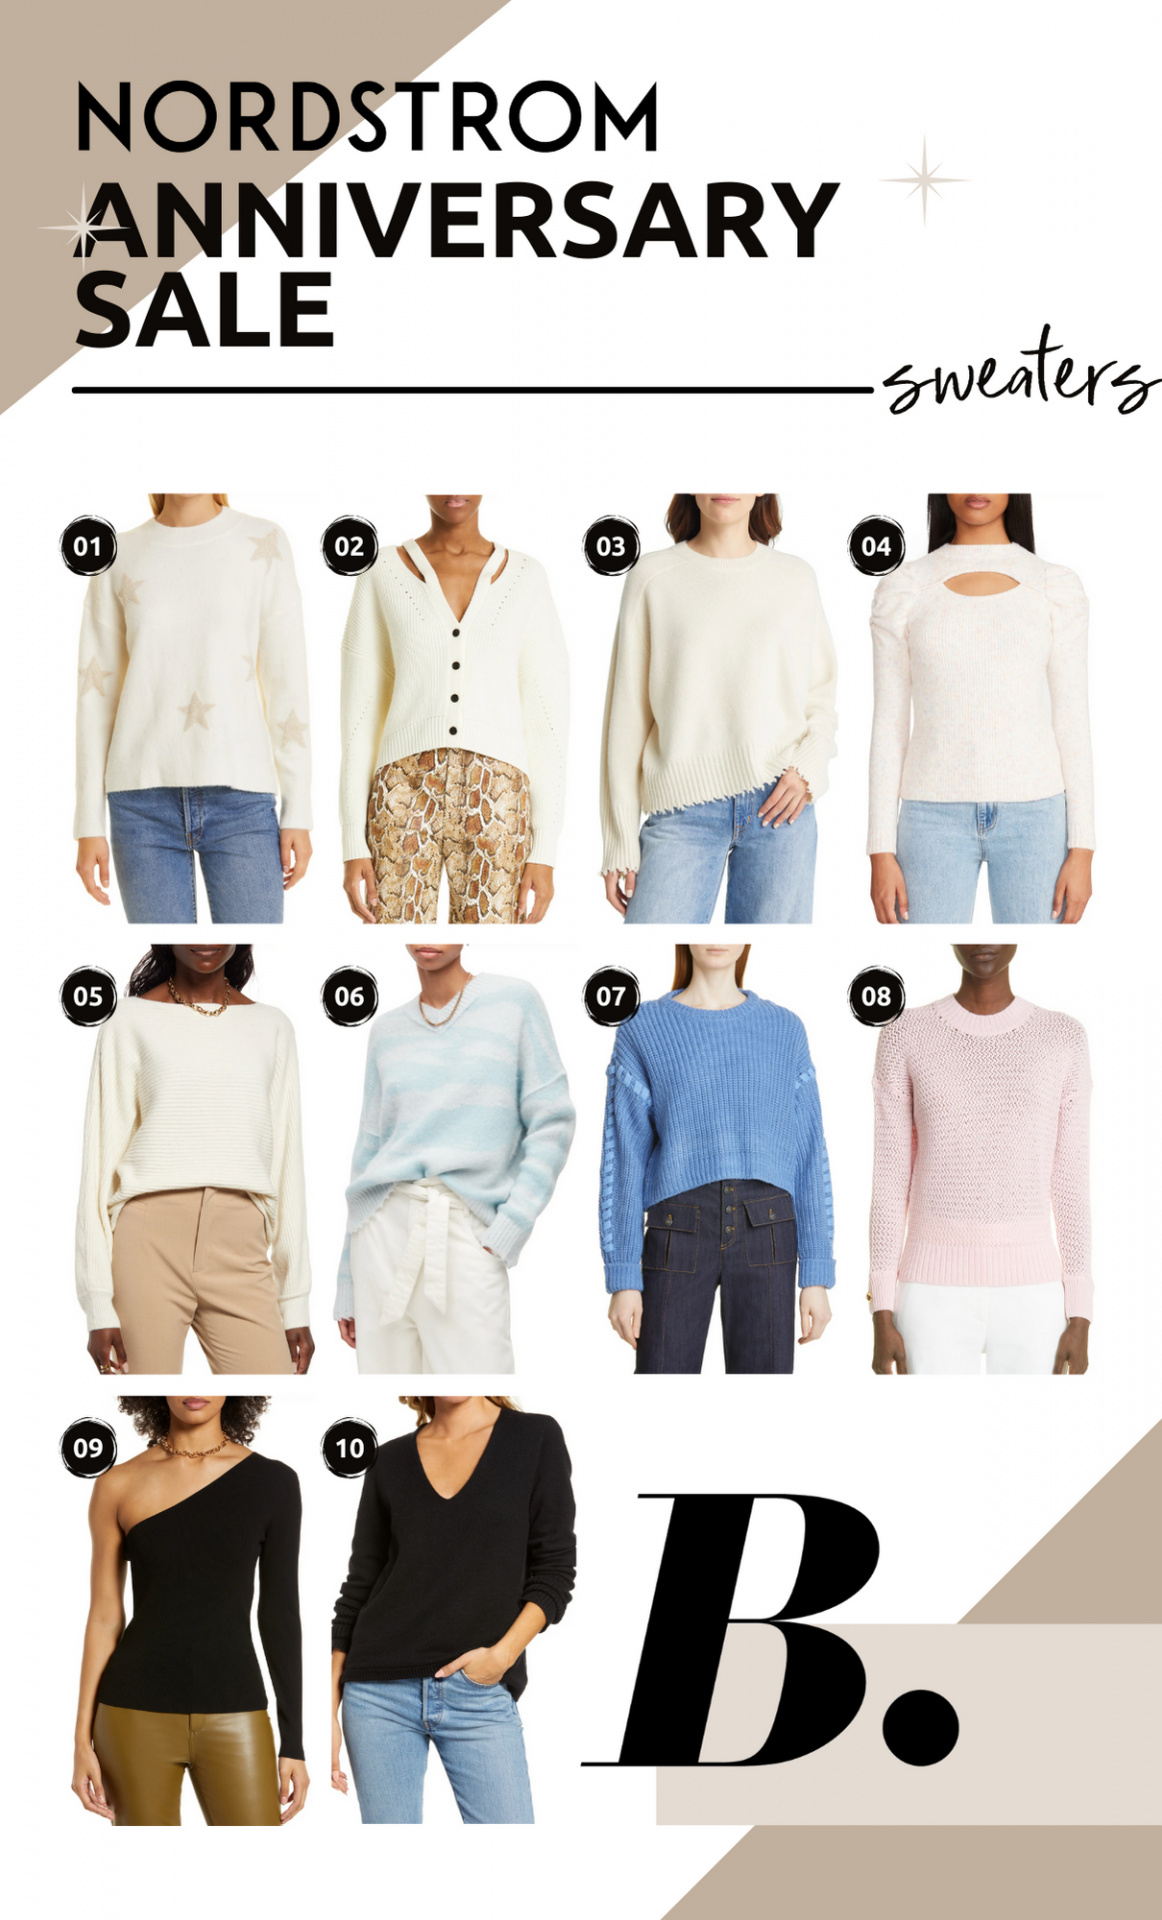 Nordstrom anniversary sale sweaters, nordstrom anniversary sale, nordstrom sale, nordstrom anniversary sale 2022, what to buy nordstrom sale, nsale, nsale 2022, best sweaters, affordable sweaters, designer sweaters, sweaters on sale, best sweaters on sale